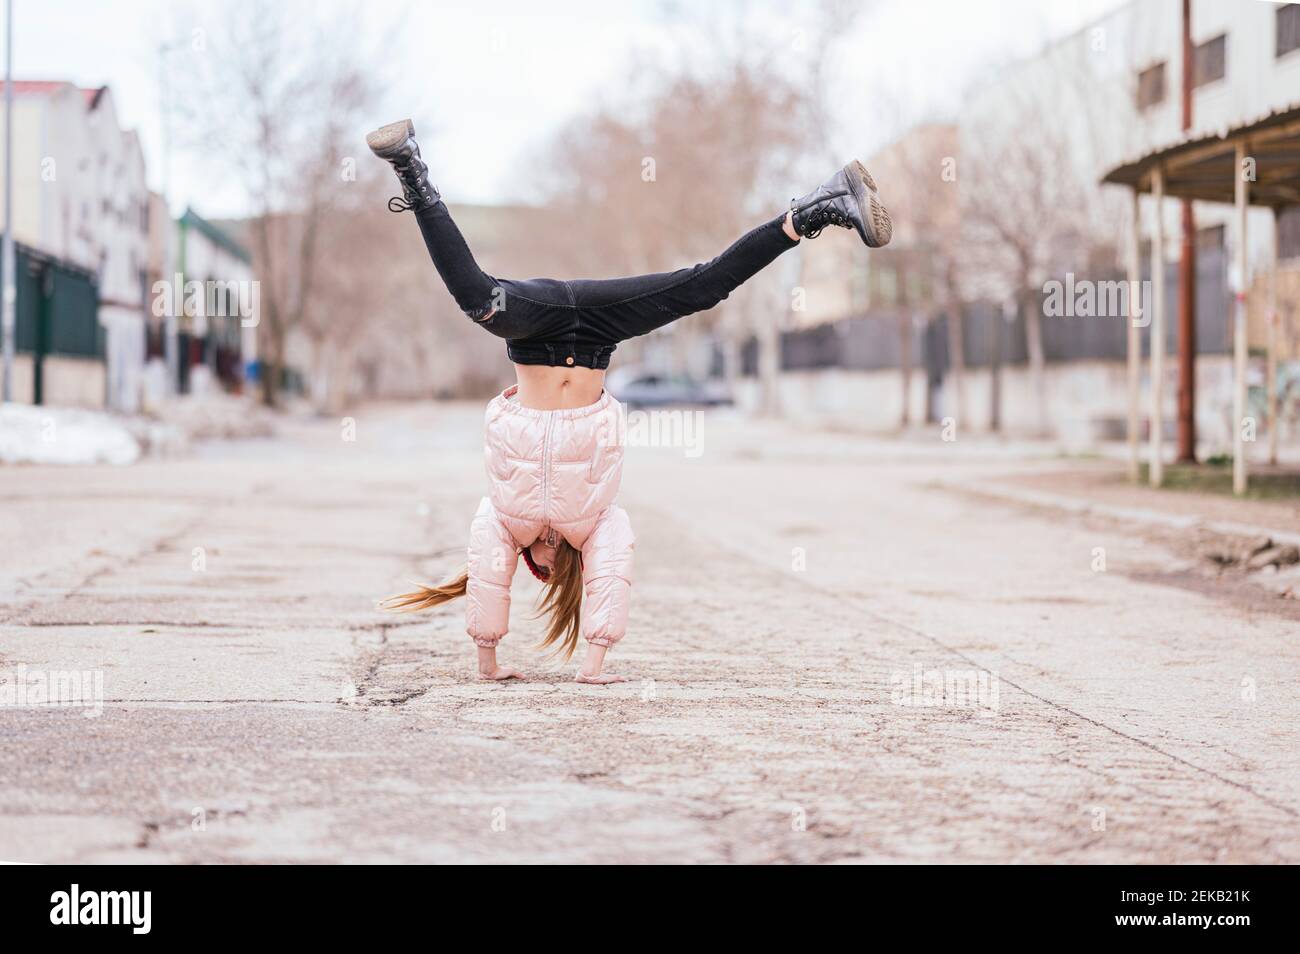 Girl doing handstand on road against sky Stock Photo - Alamy